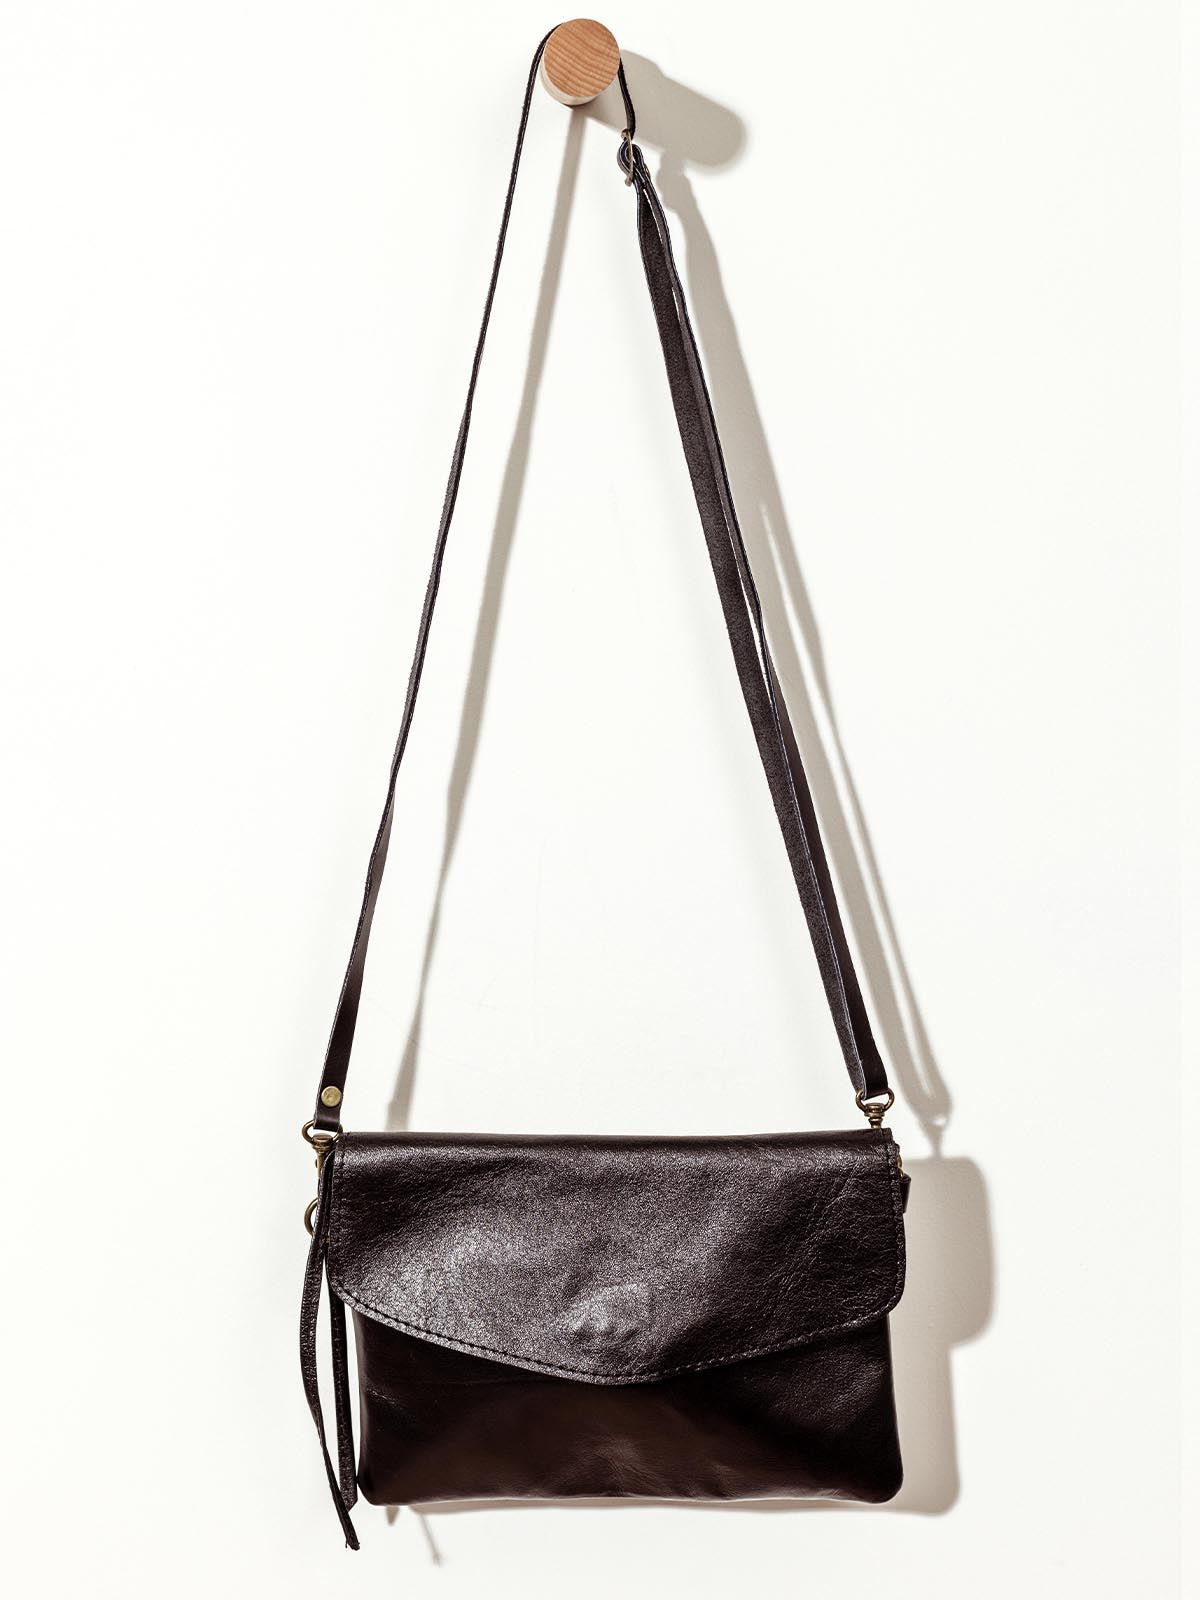 Black leather crossbody clutch on white wall.